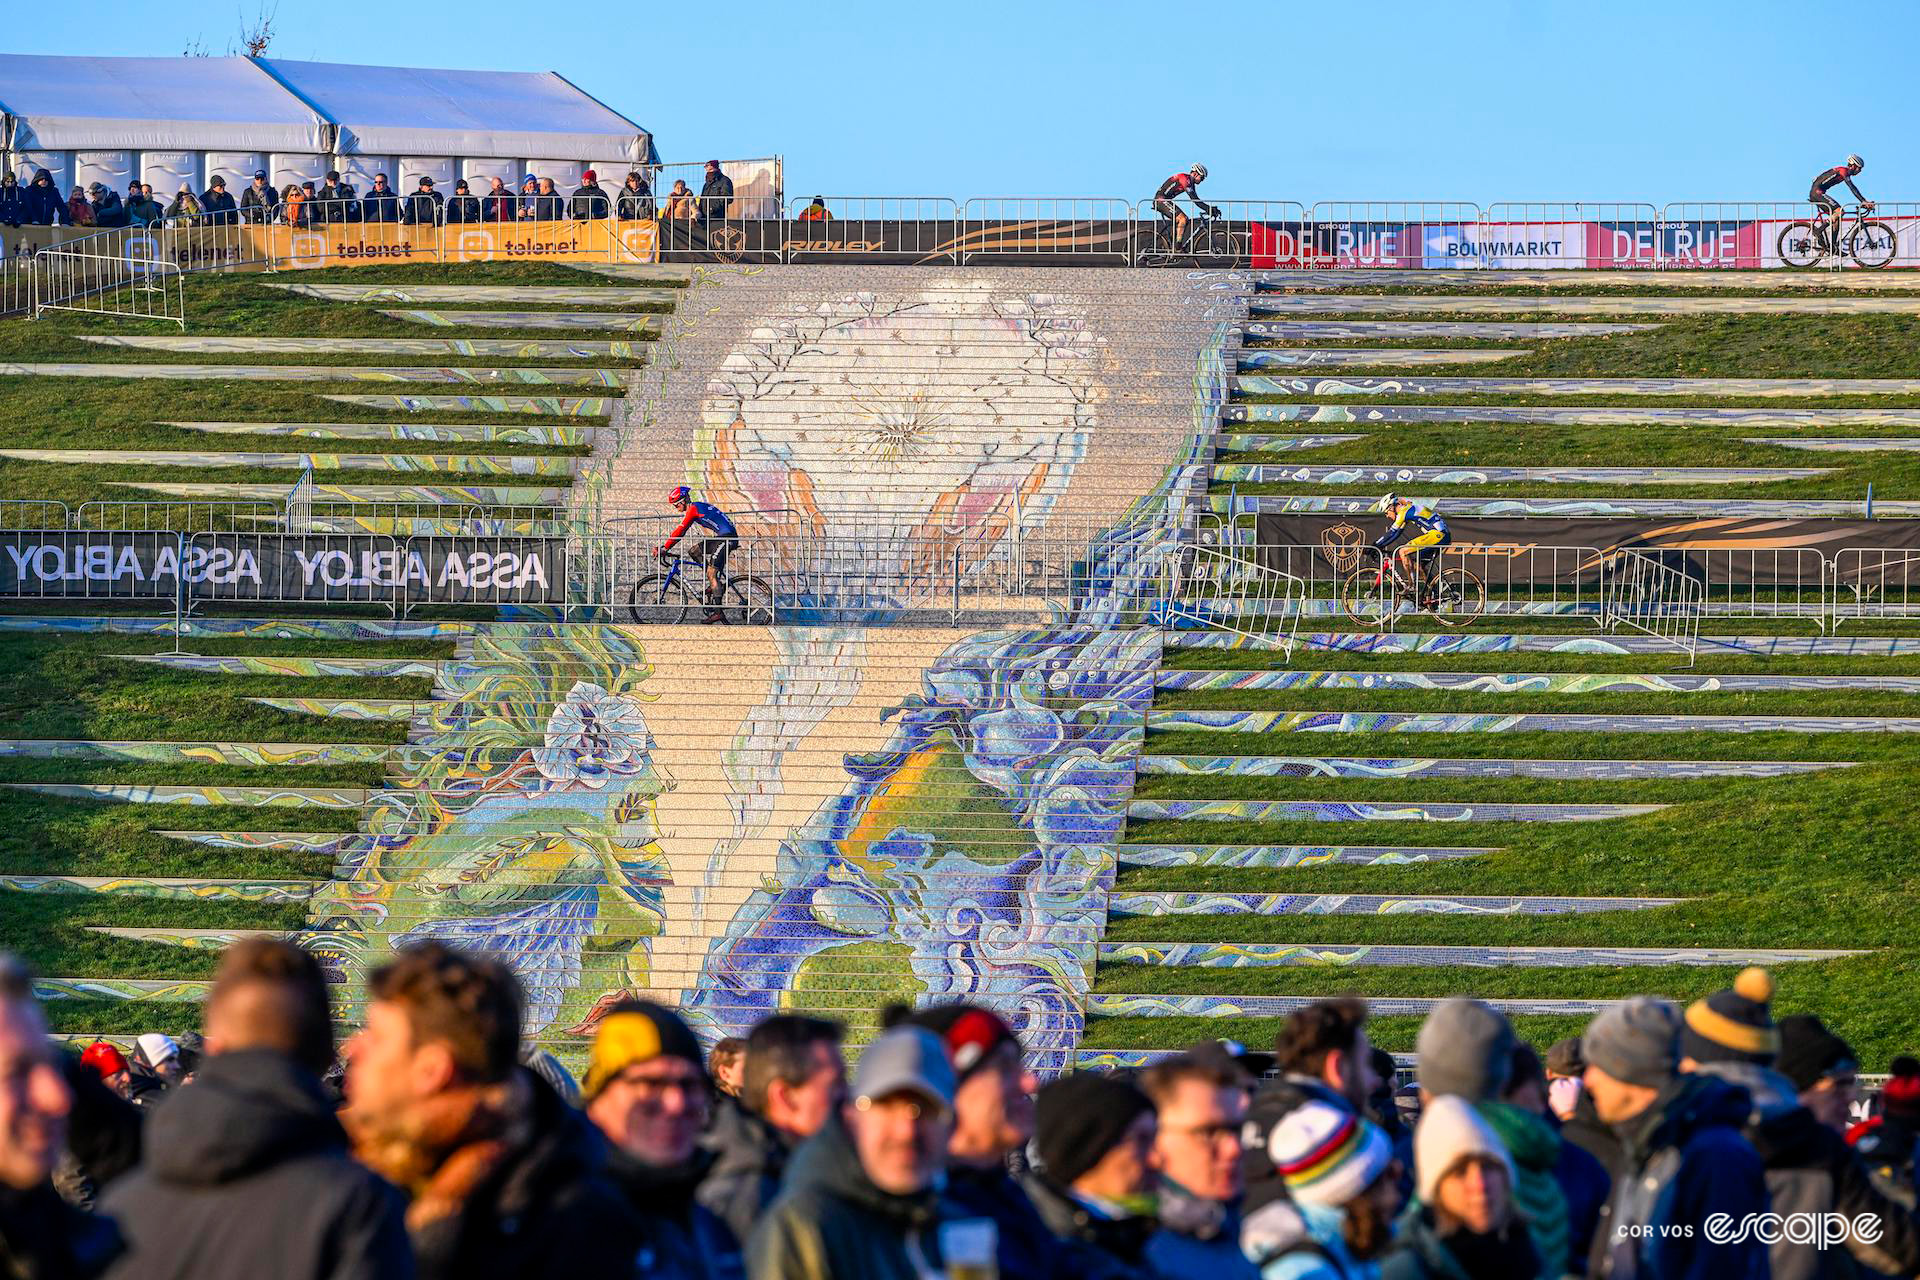 A wide shot of riders on the 'Stairway to Eternity', a 60-metre-long mosaic stairway in the main amphitheatre of De Schorre park, Boom, home of the Tomorrowland festival and Superprestige Boom.